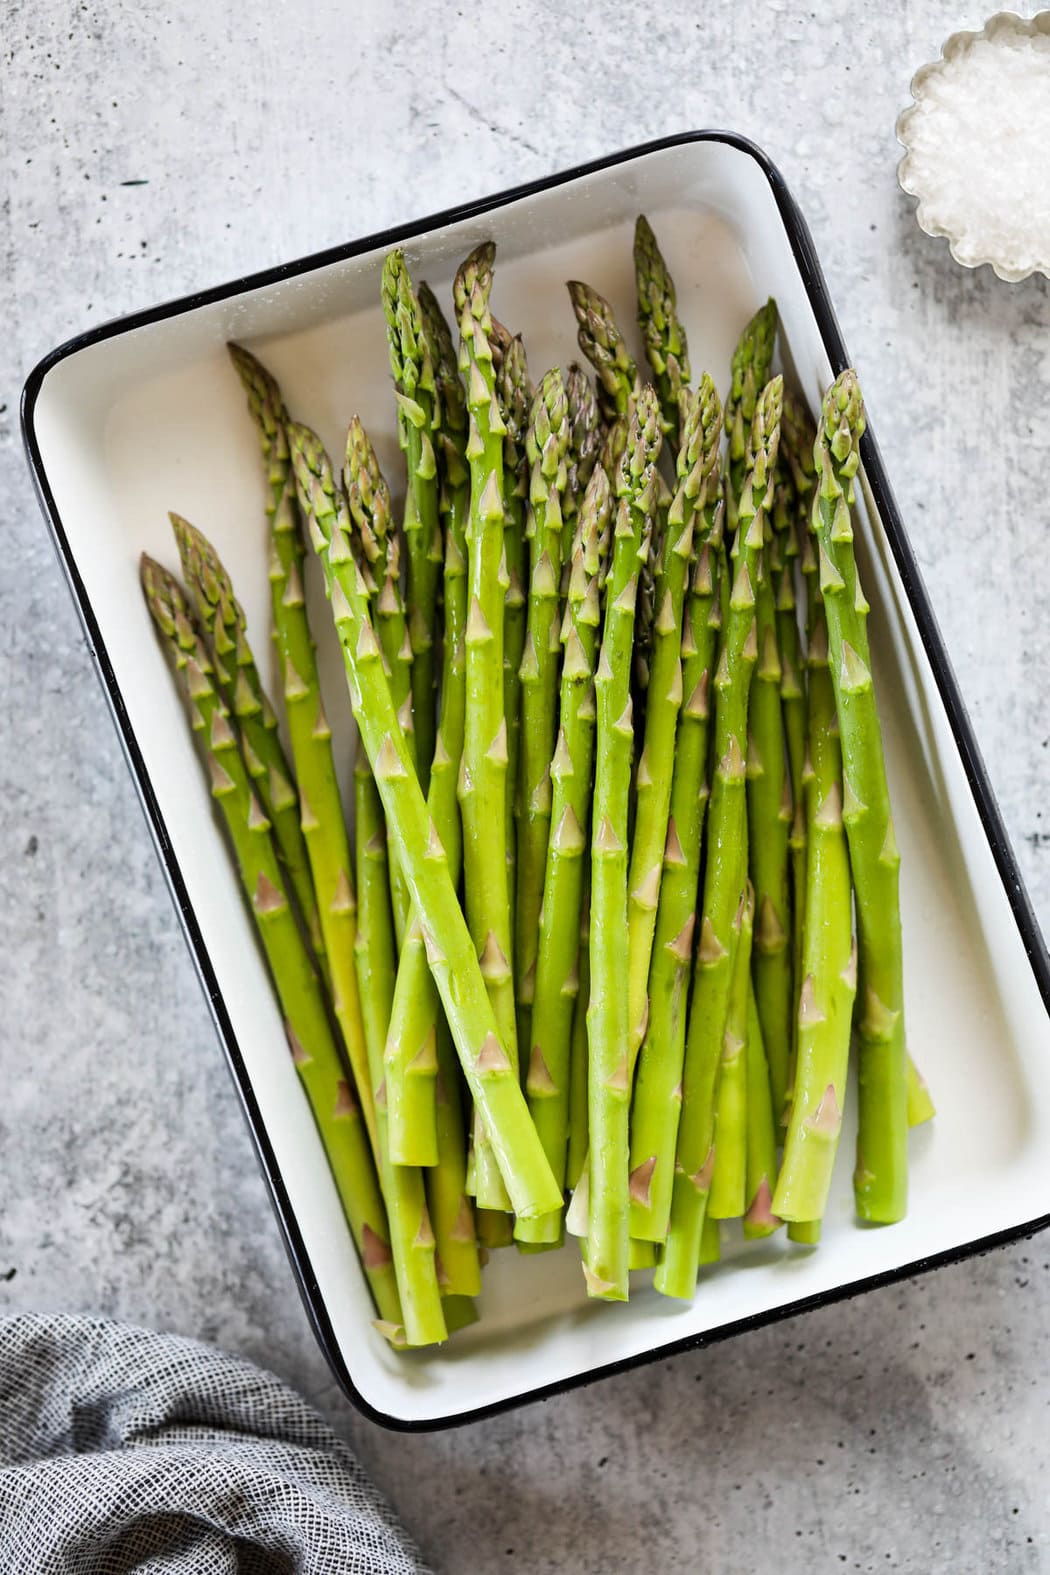 A white baking tray filled with fresh asparagus spears.